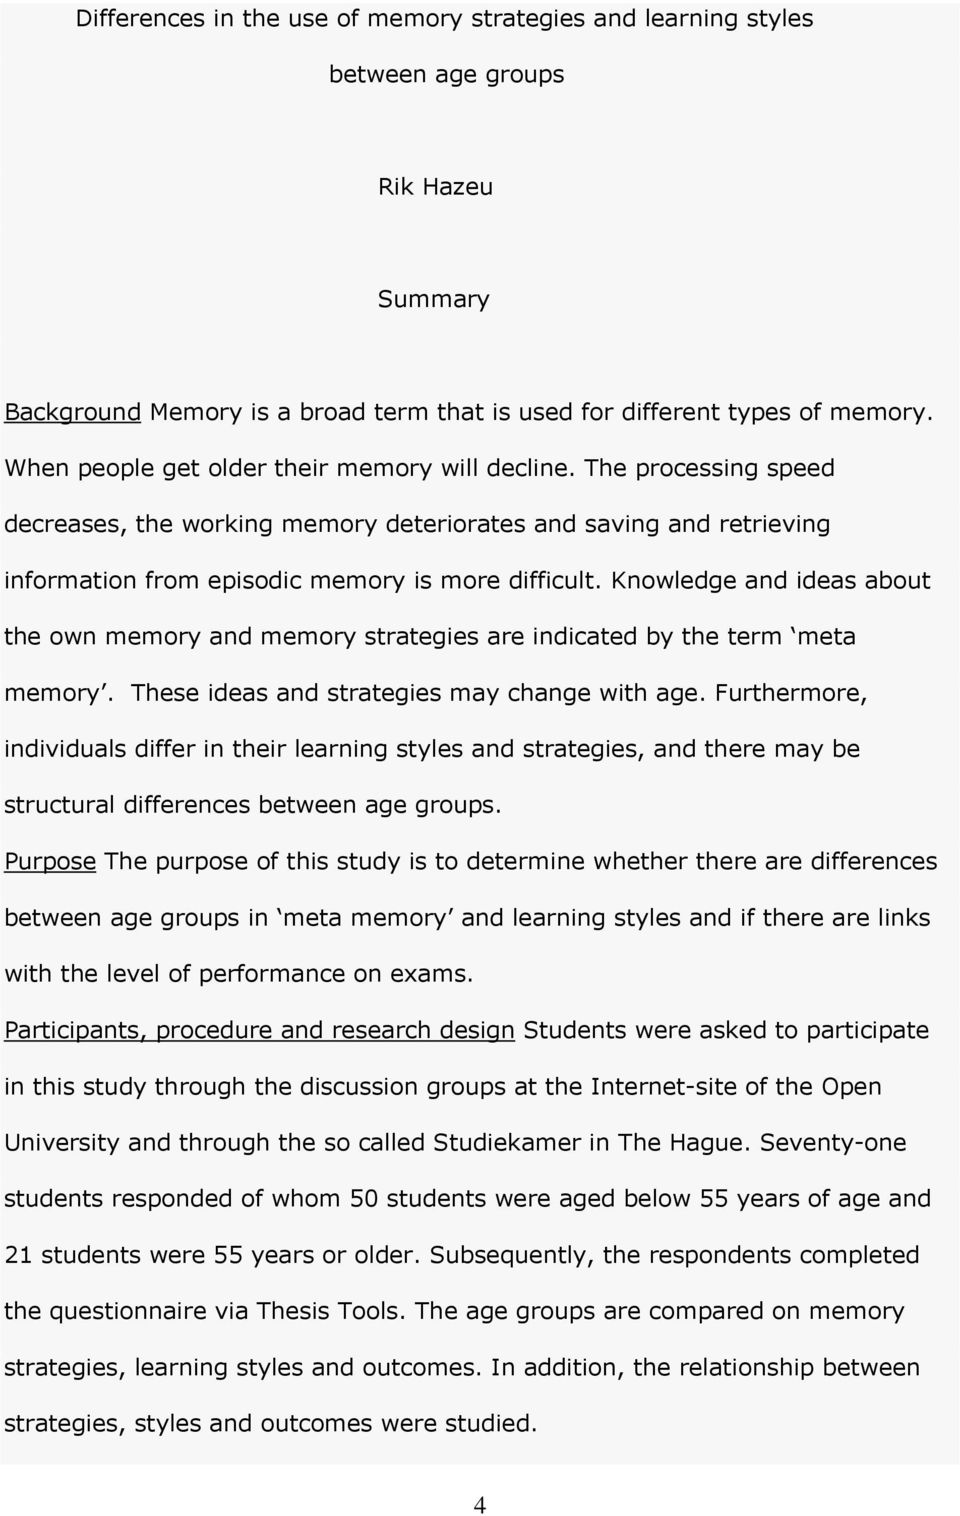 Knowledge and ideas about the own memory and memory strategies are indicated by the term meta memory. These ideas and strategies may change with age.